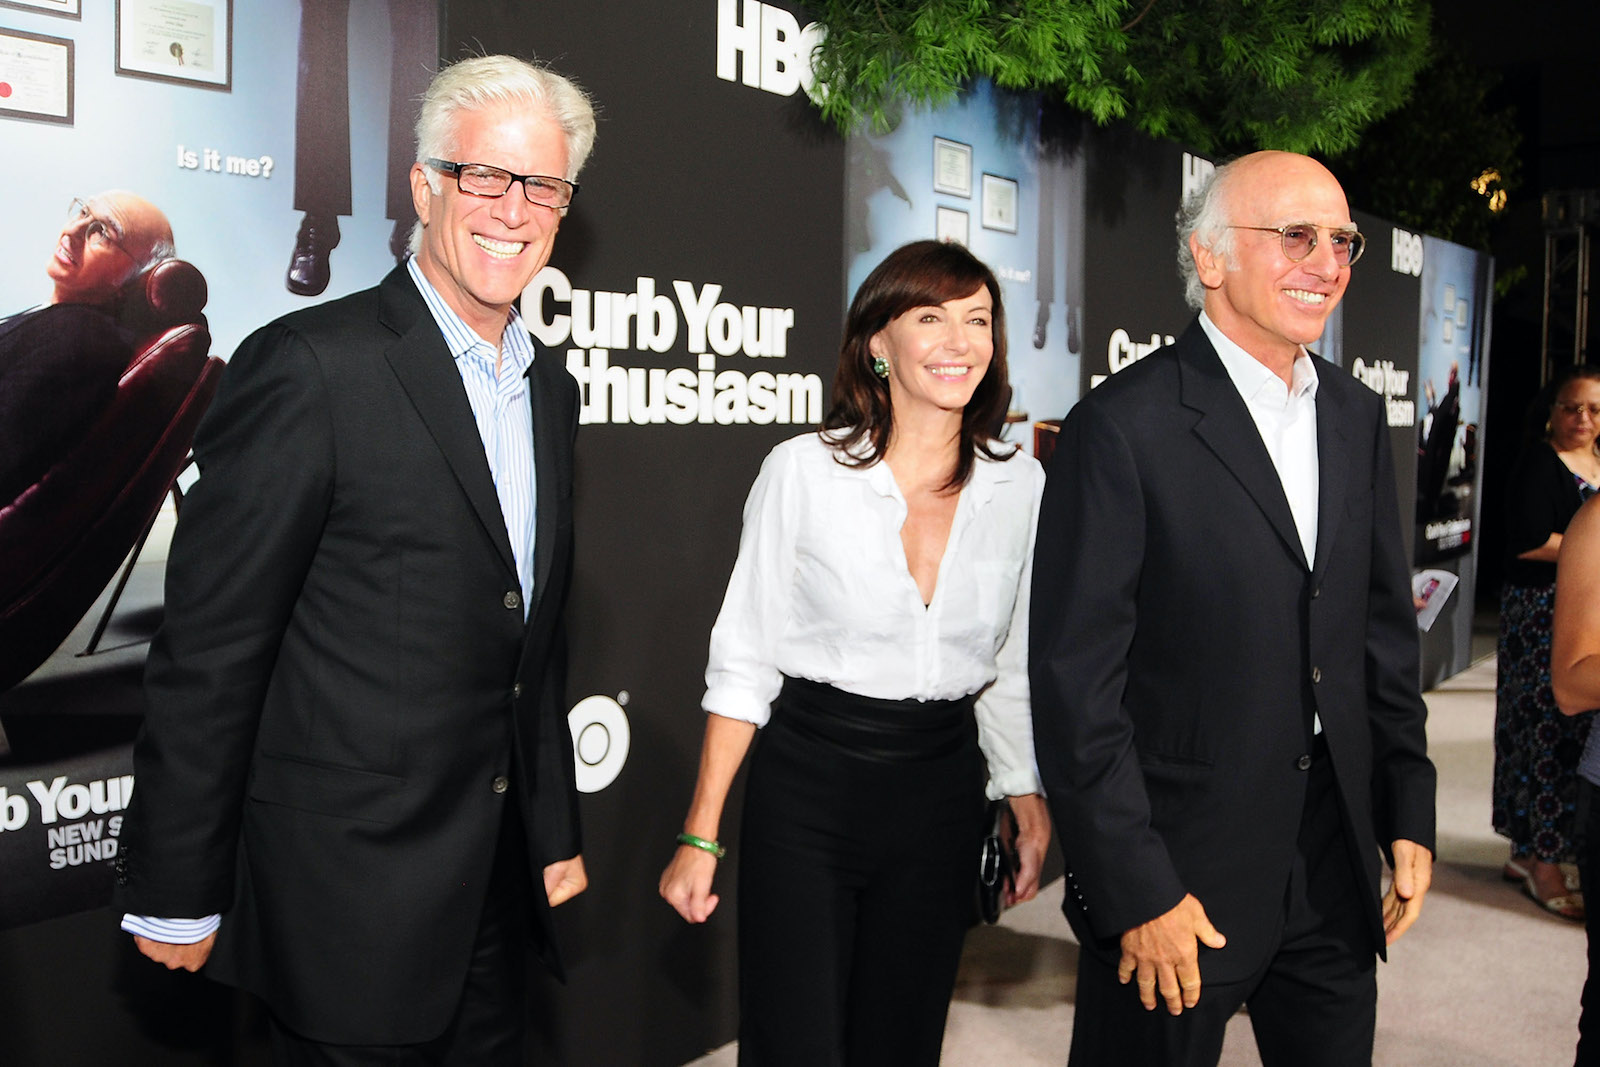 Curb Your Enthusiasm: Ted Danson, Mary Steenburgen and Larry David arrive at the 2009 HBO premiere